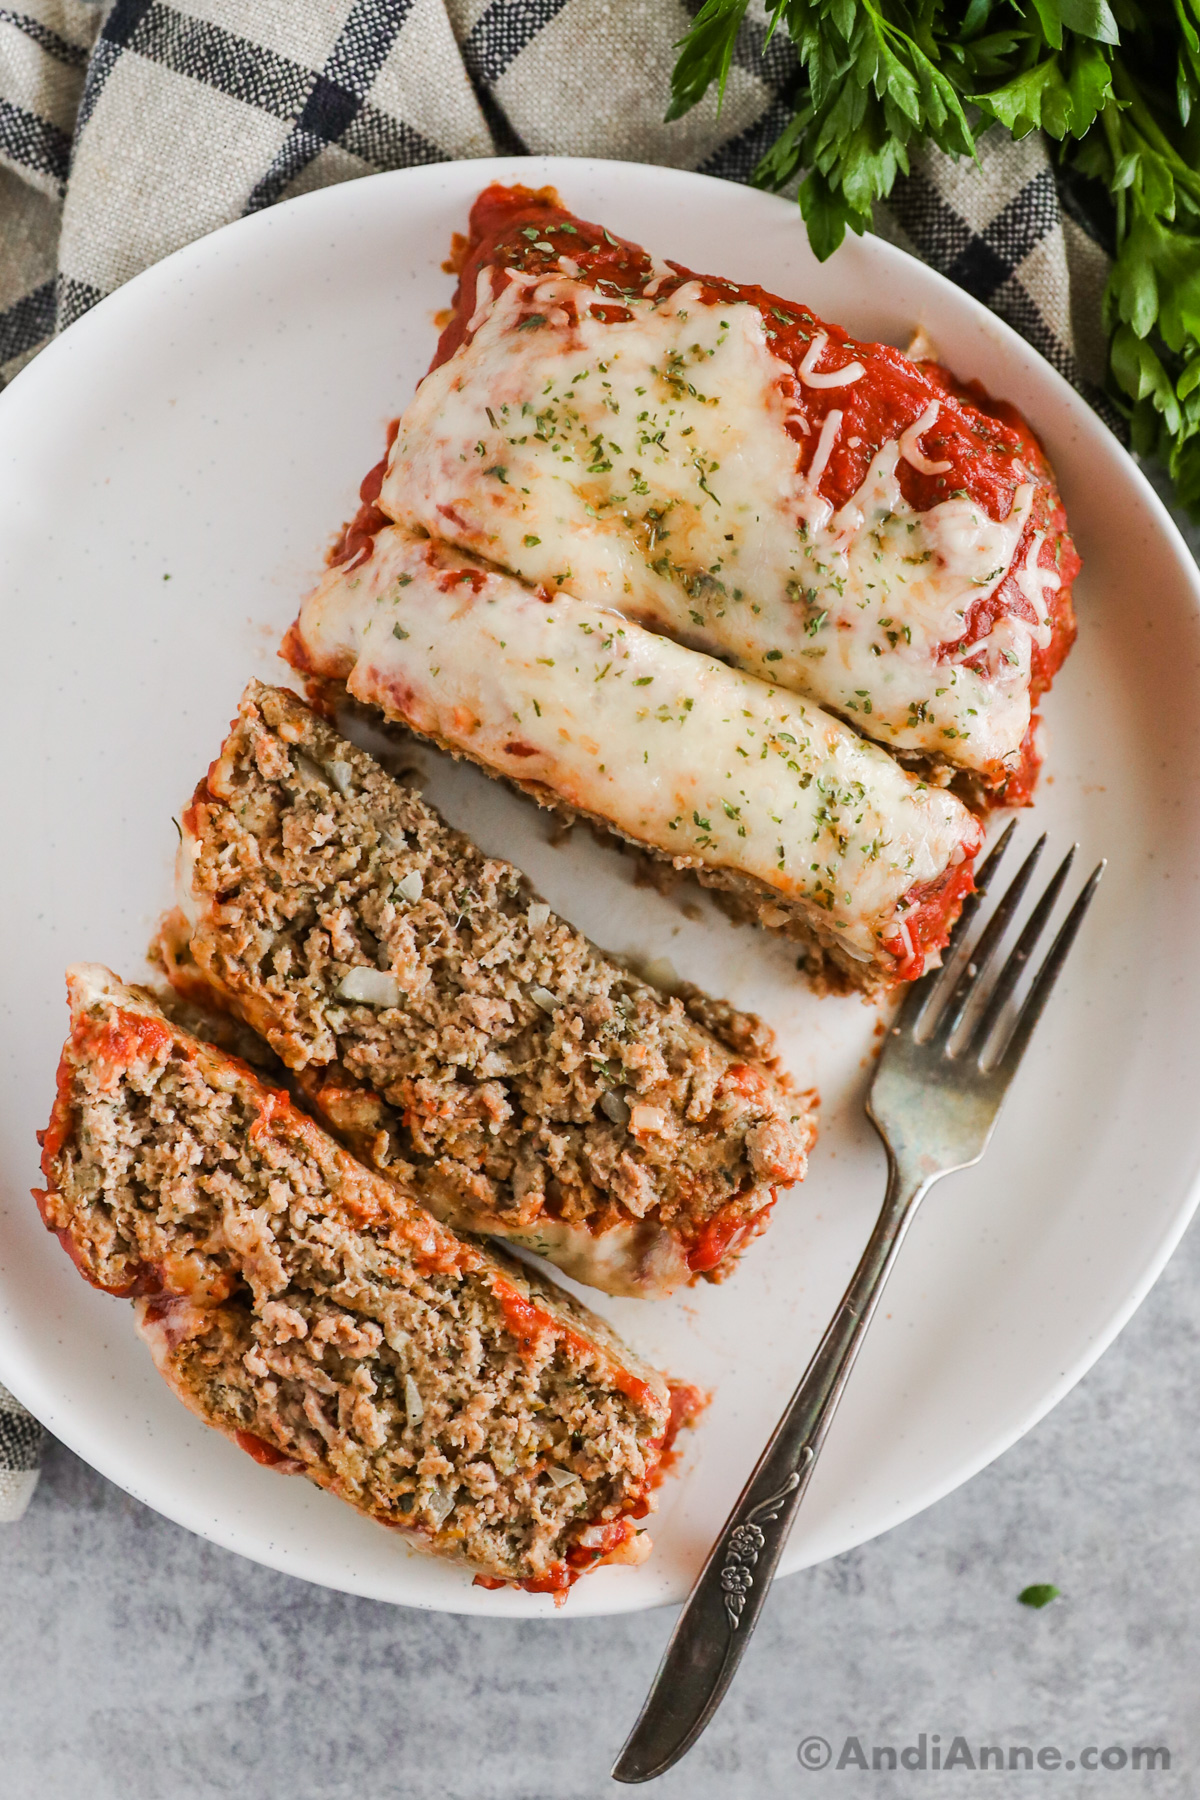 Slices of pizza meatloaf on a white plate with a fork.